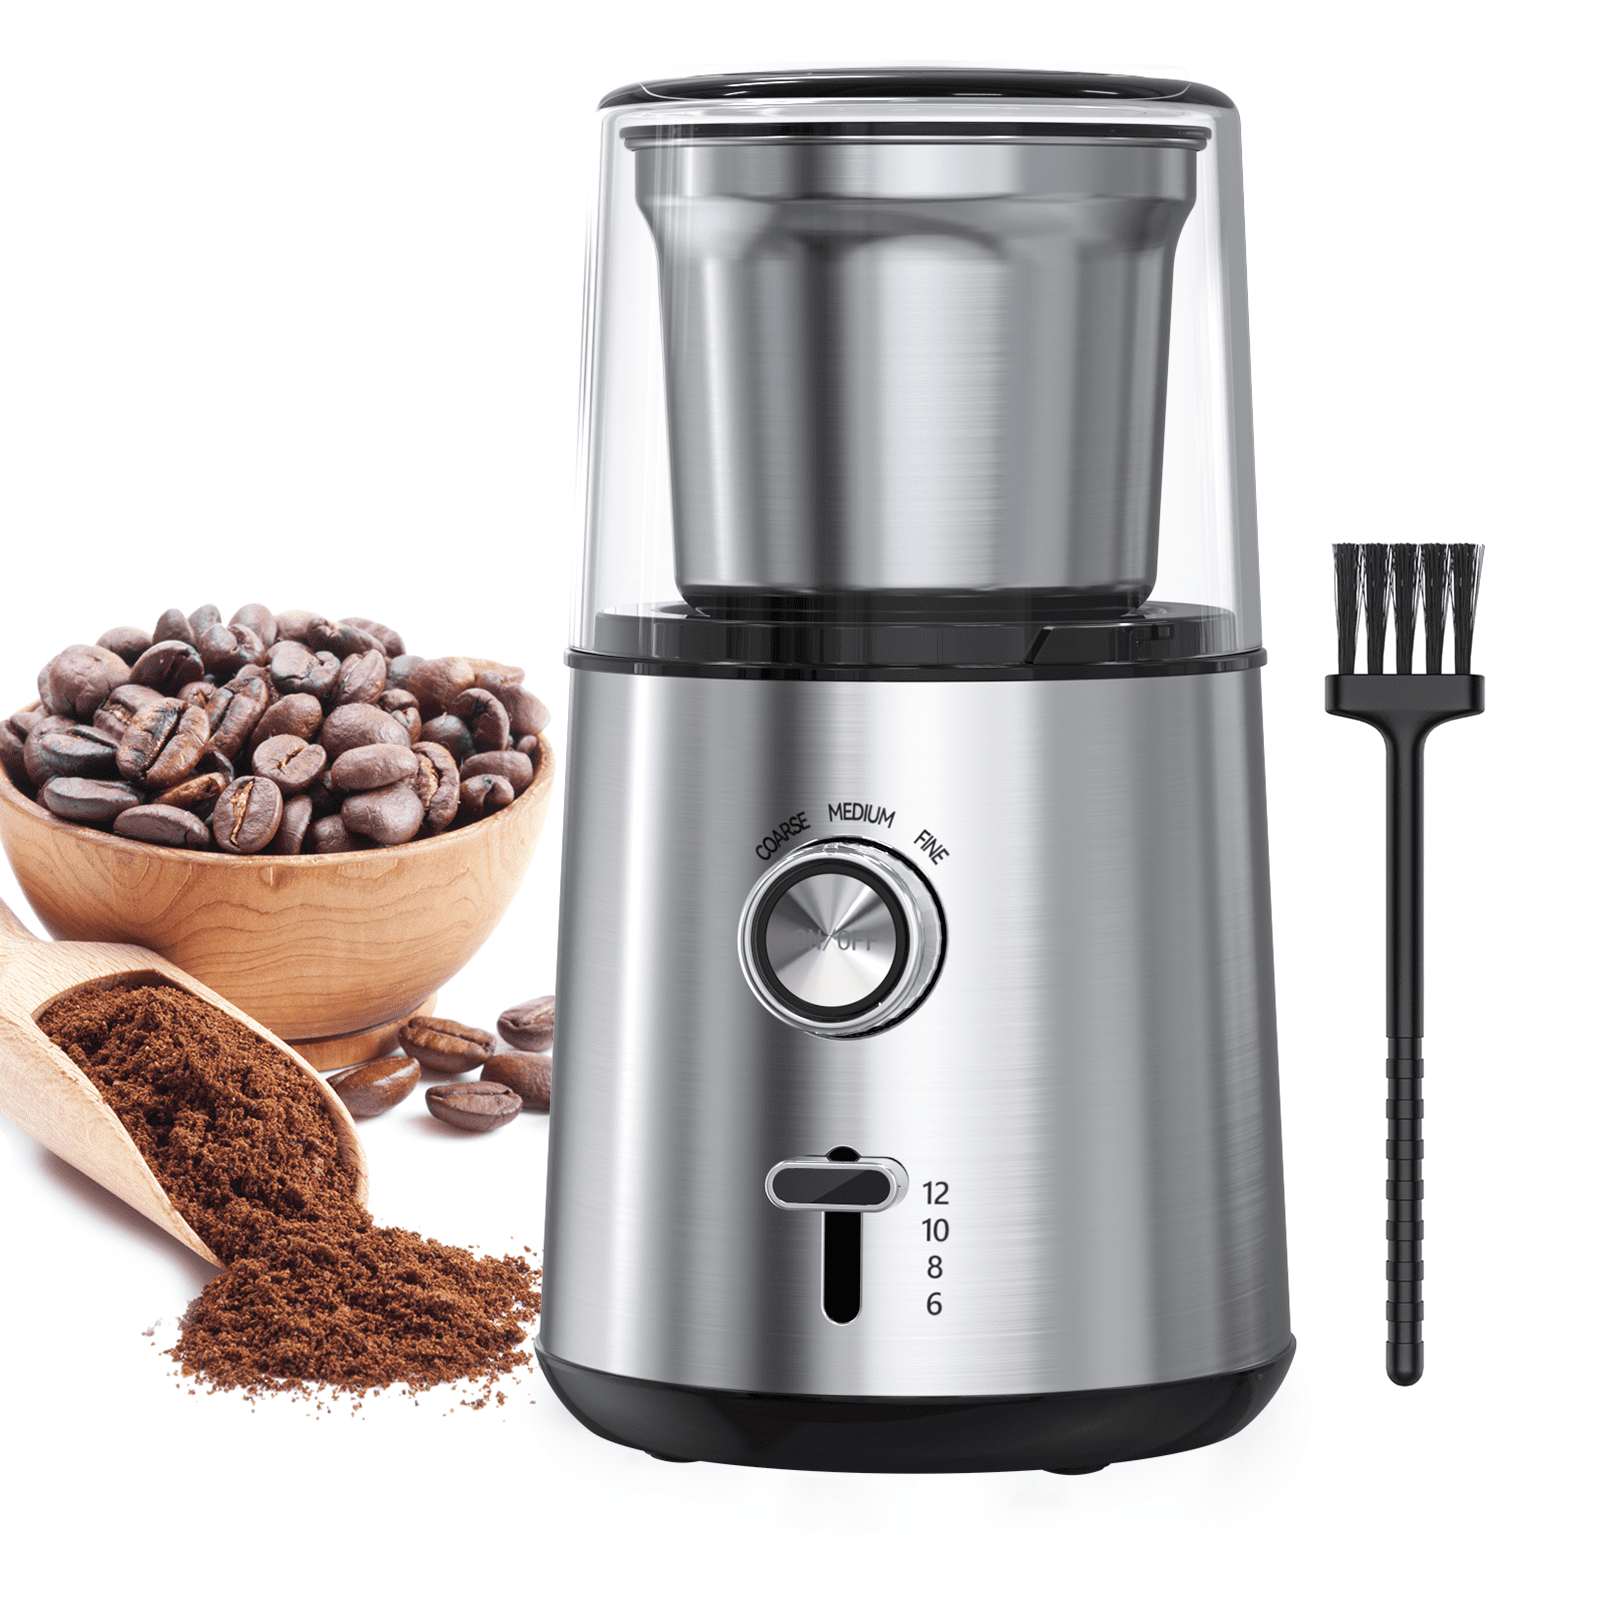 Waring 3-Cup Electric Wet / Dry Spice Grinder - 6 1/2L x 7 1/2W